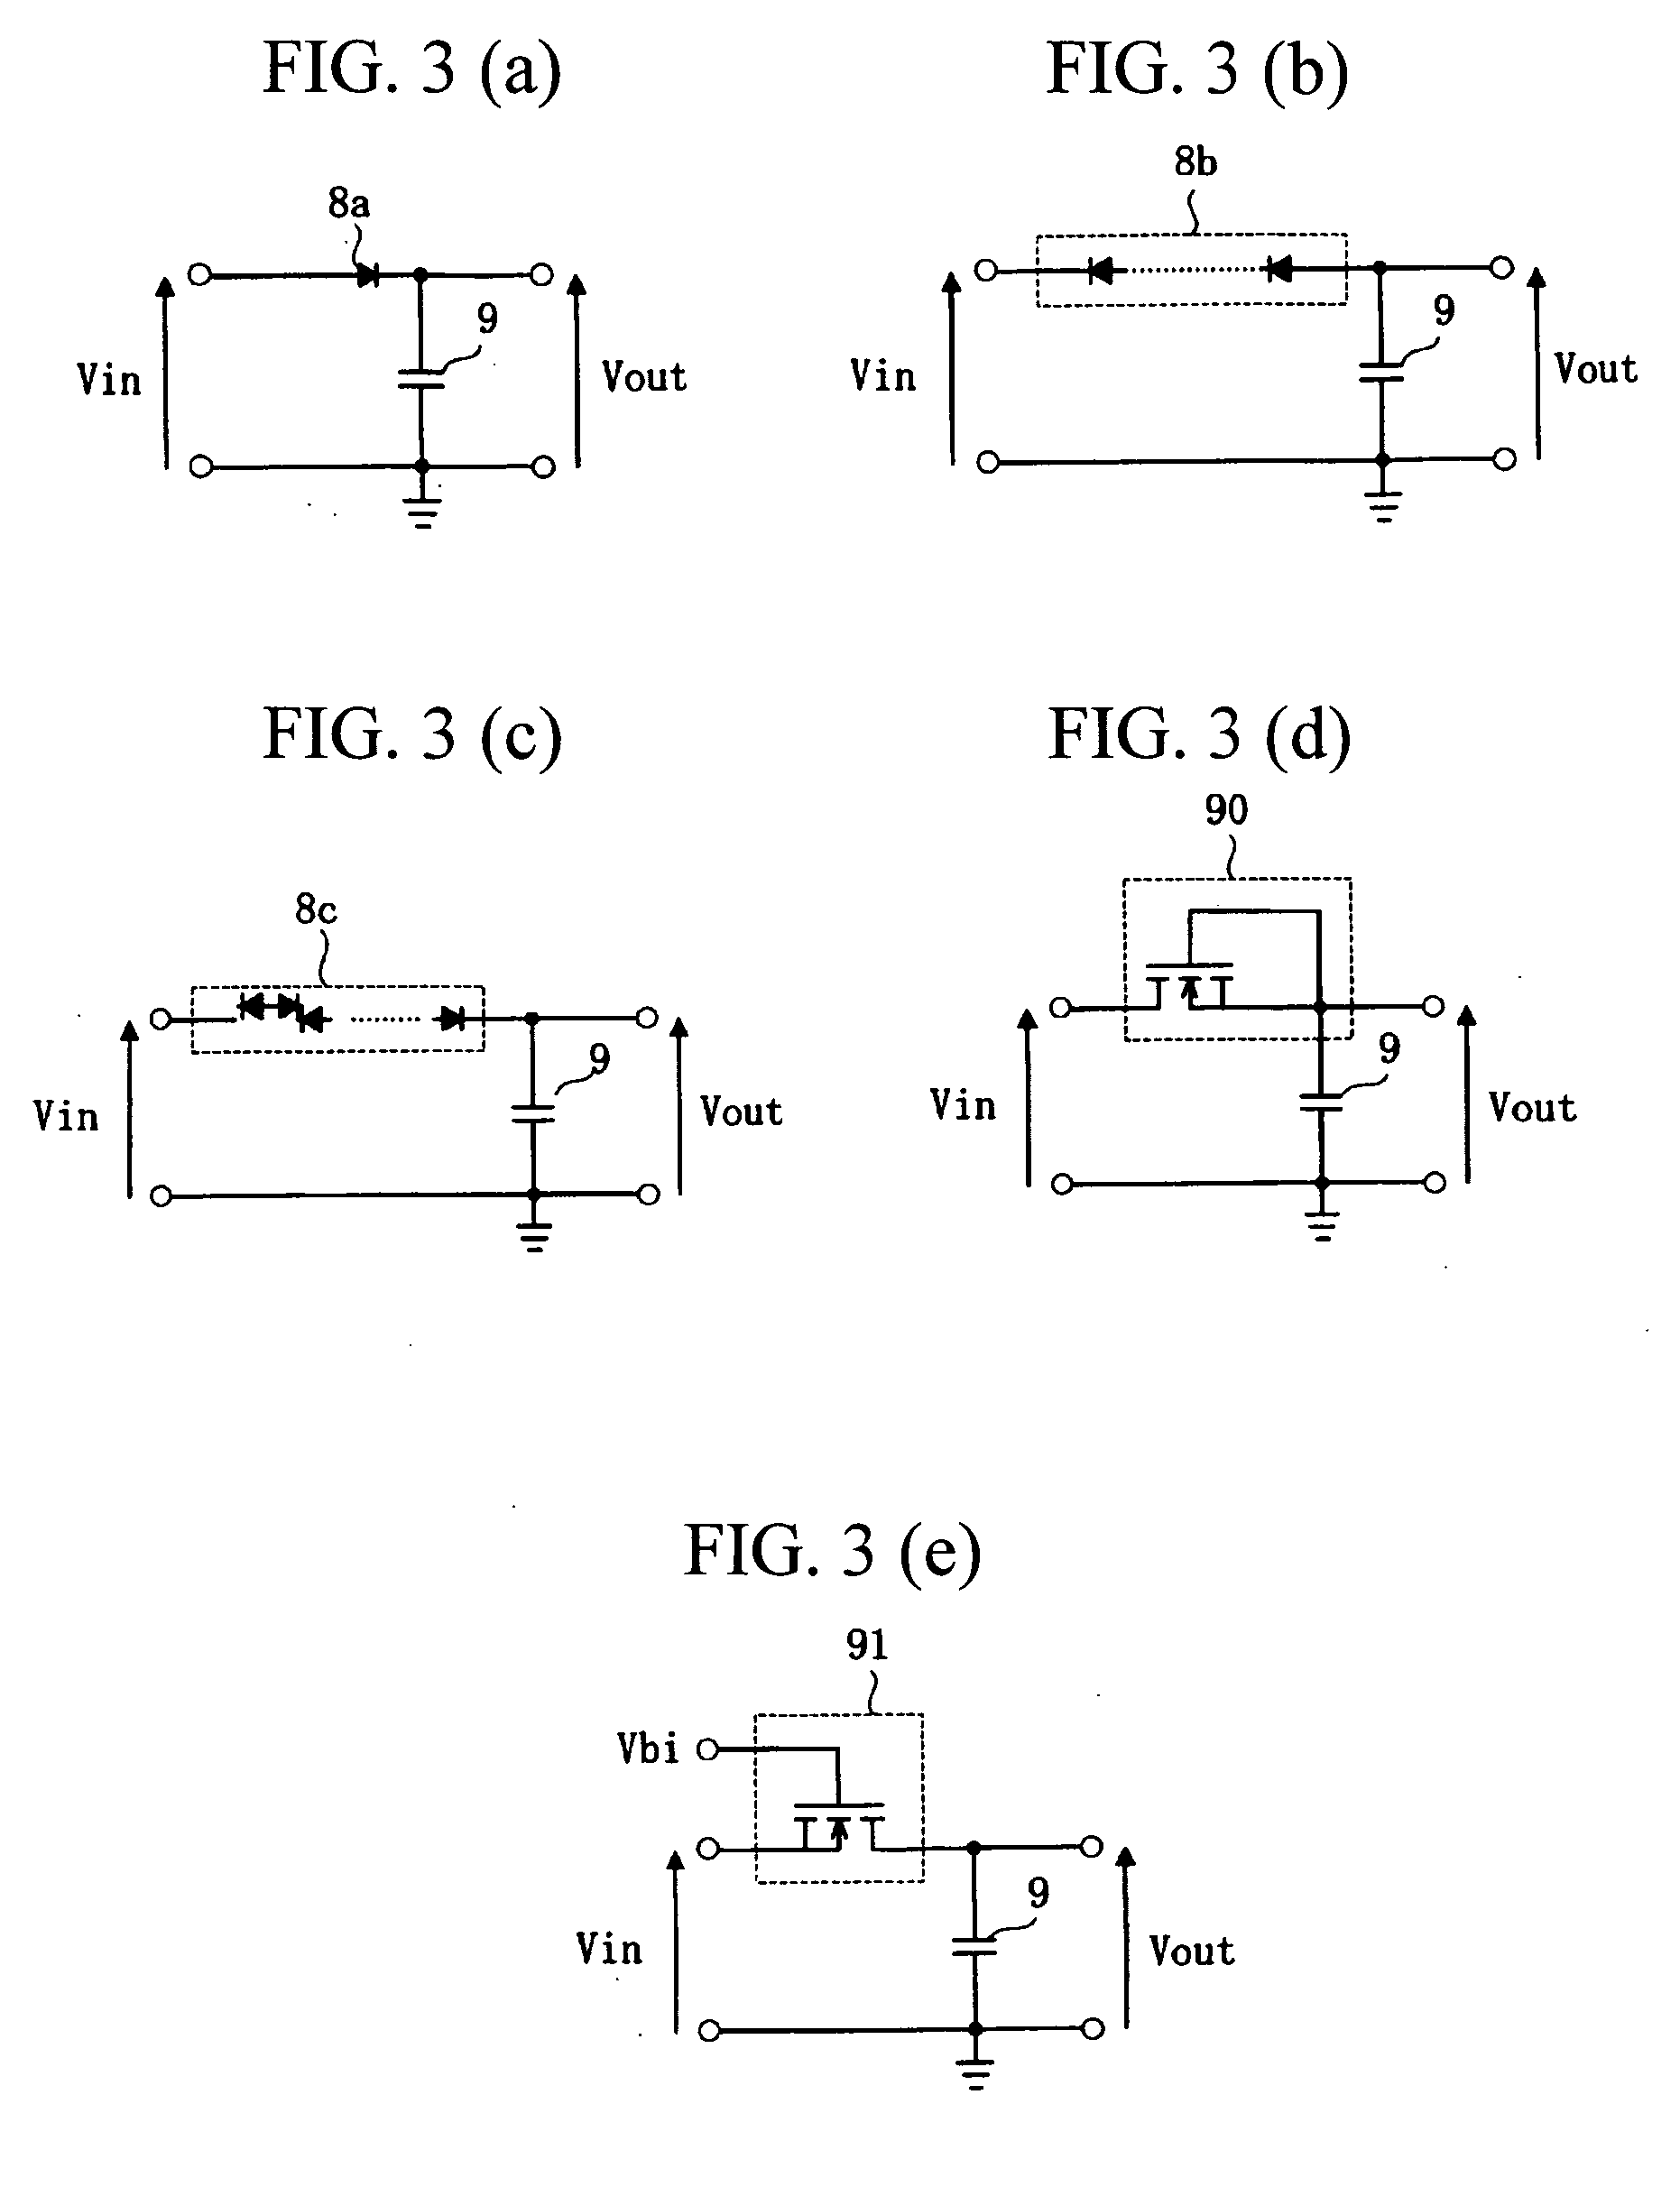 Integration circuit, decrement circuit, and semiconductor devices